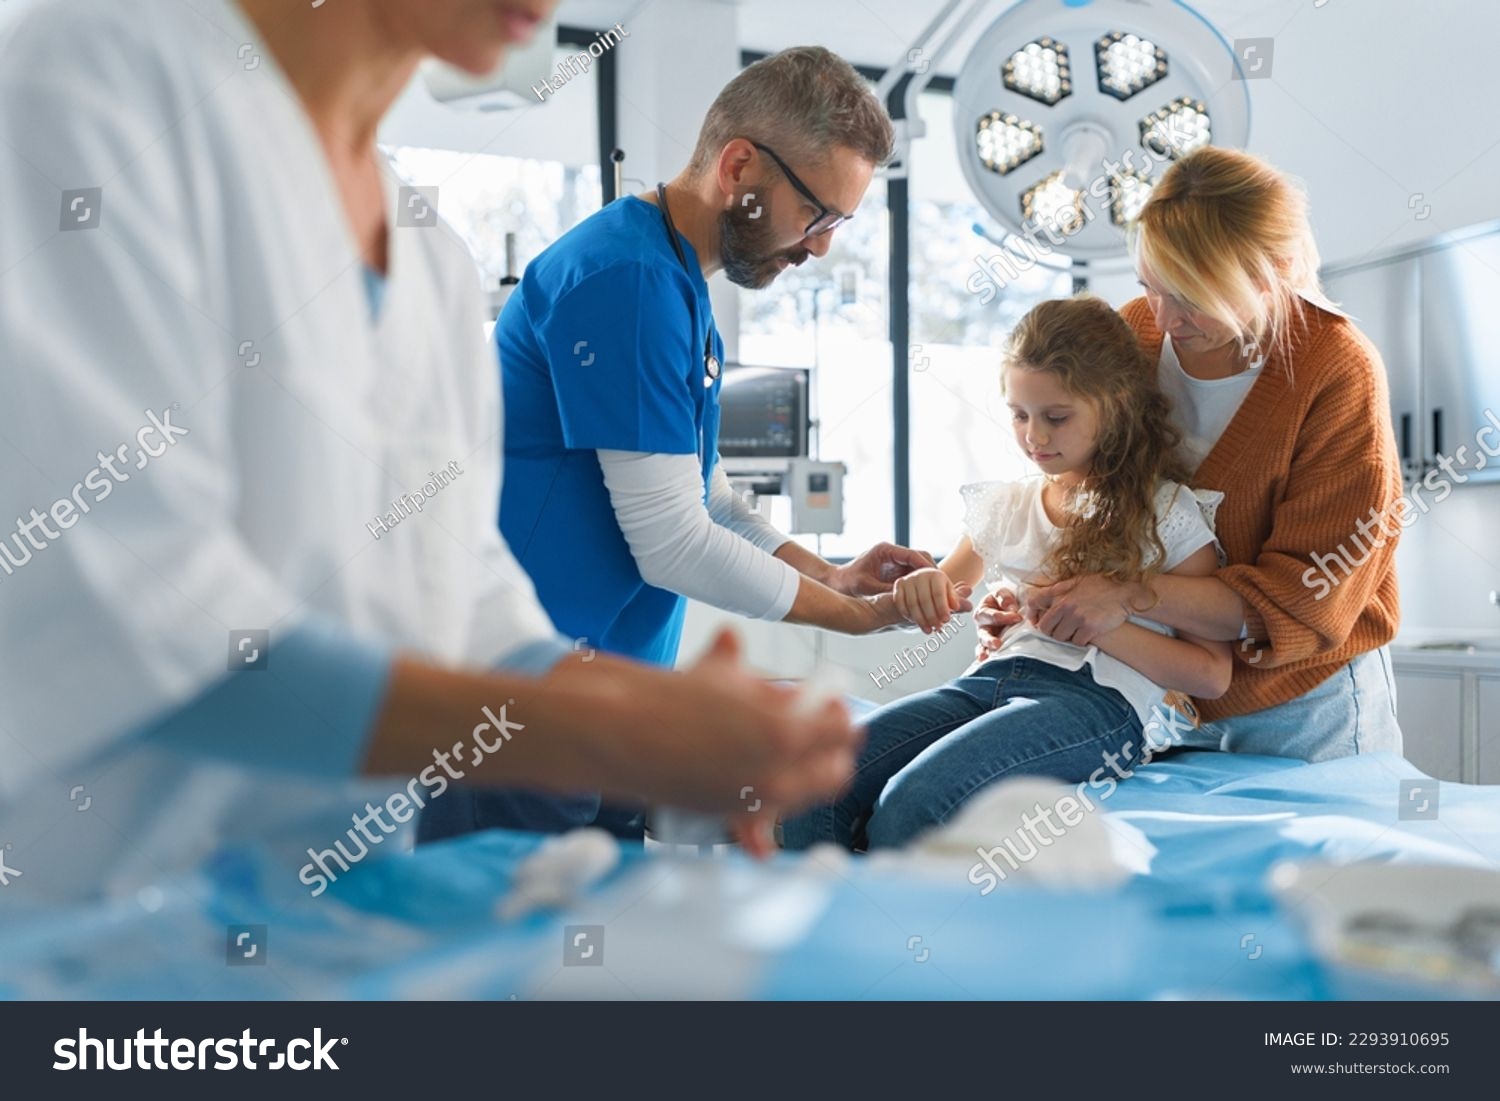 Little girl with her mother in surgery examination. #2293910695